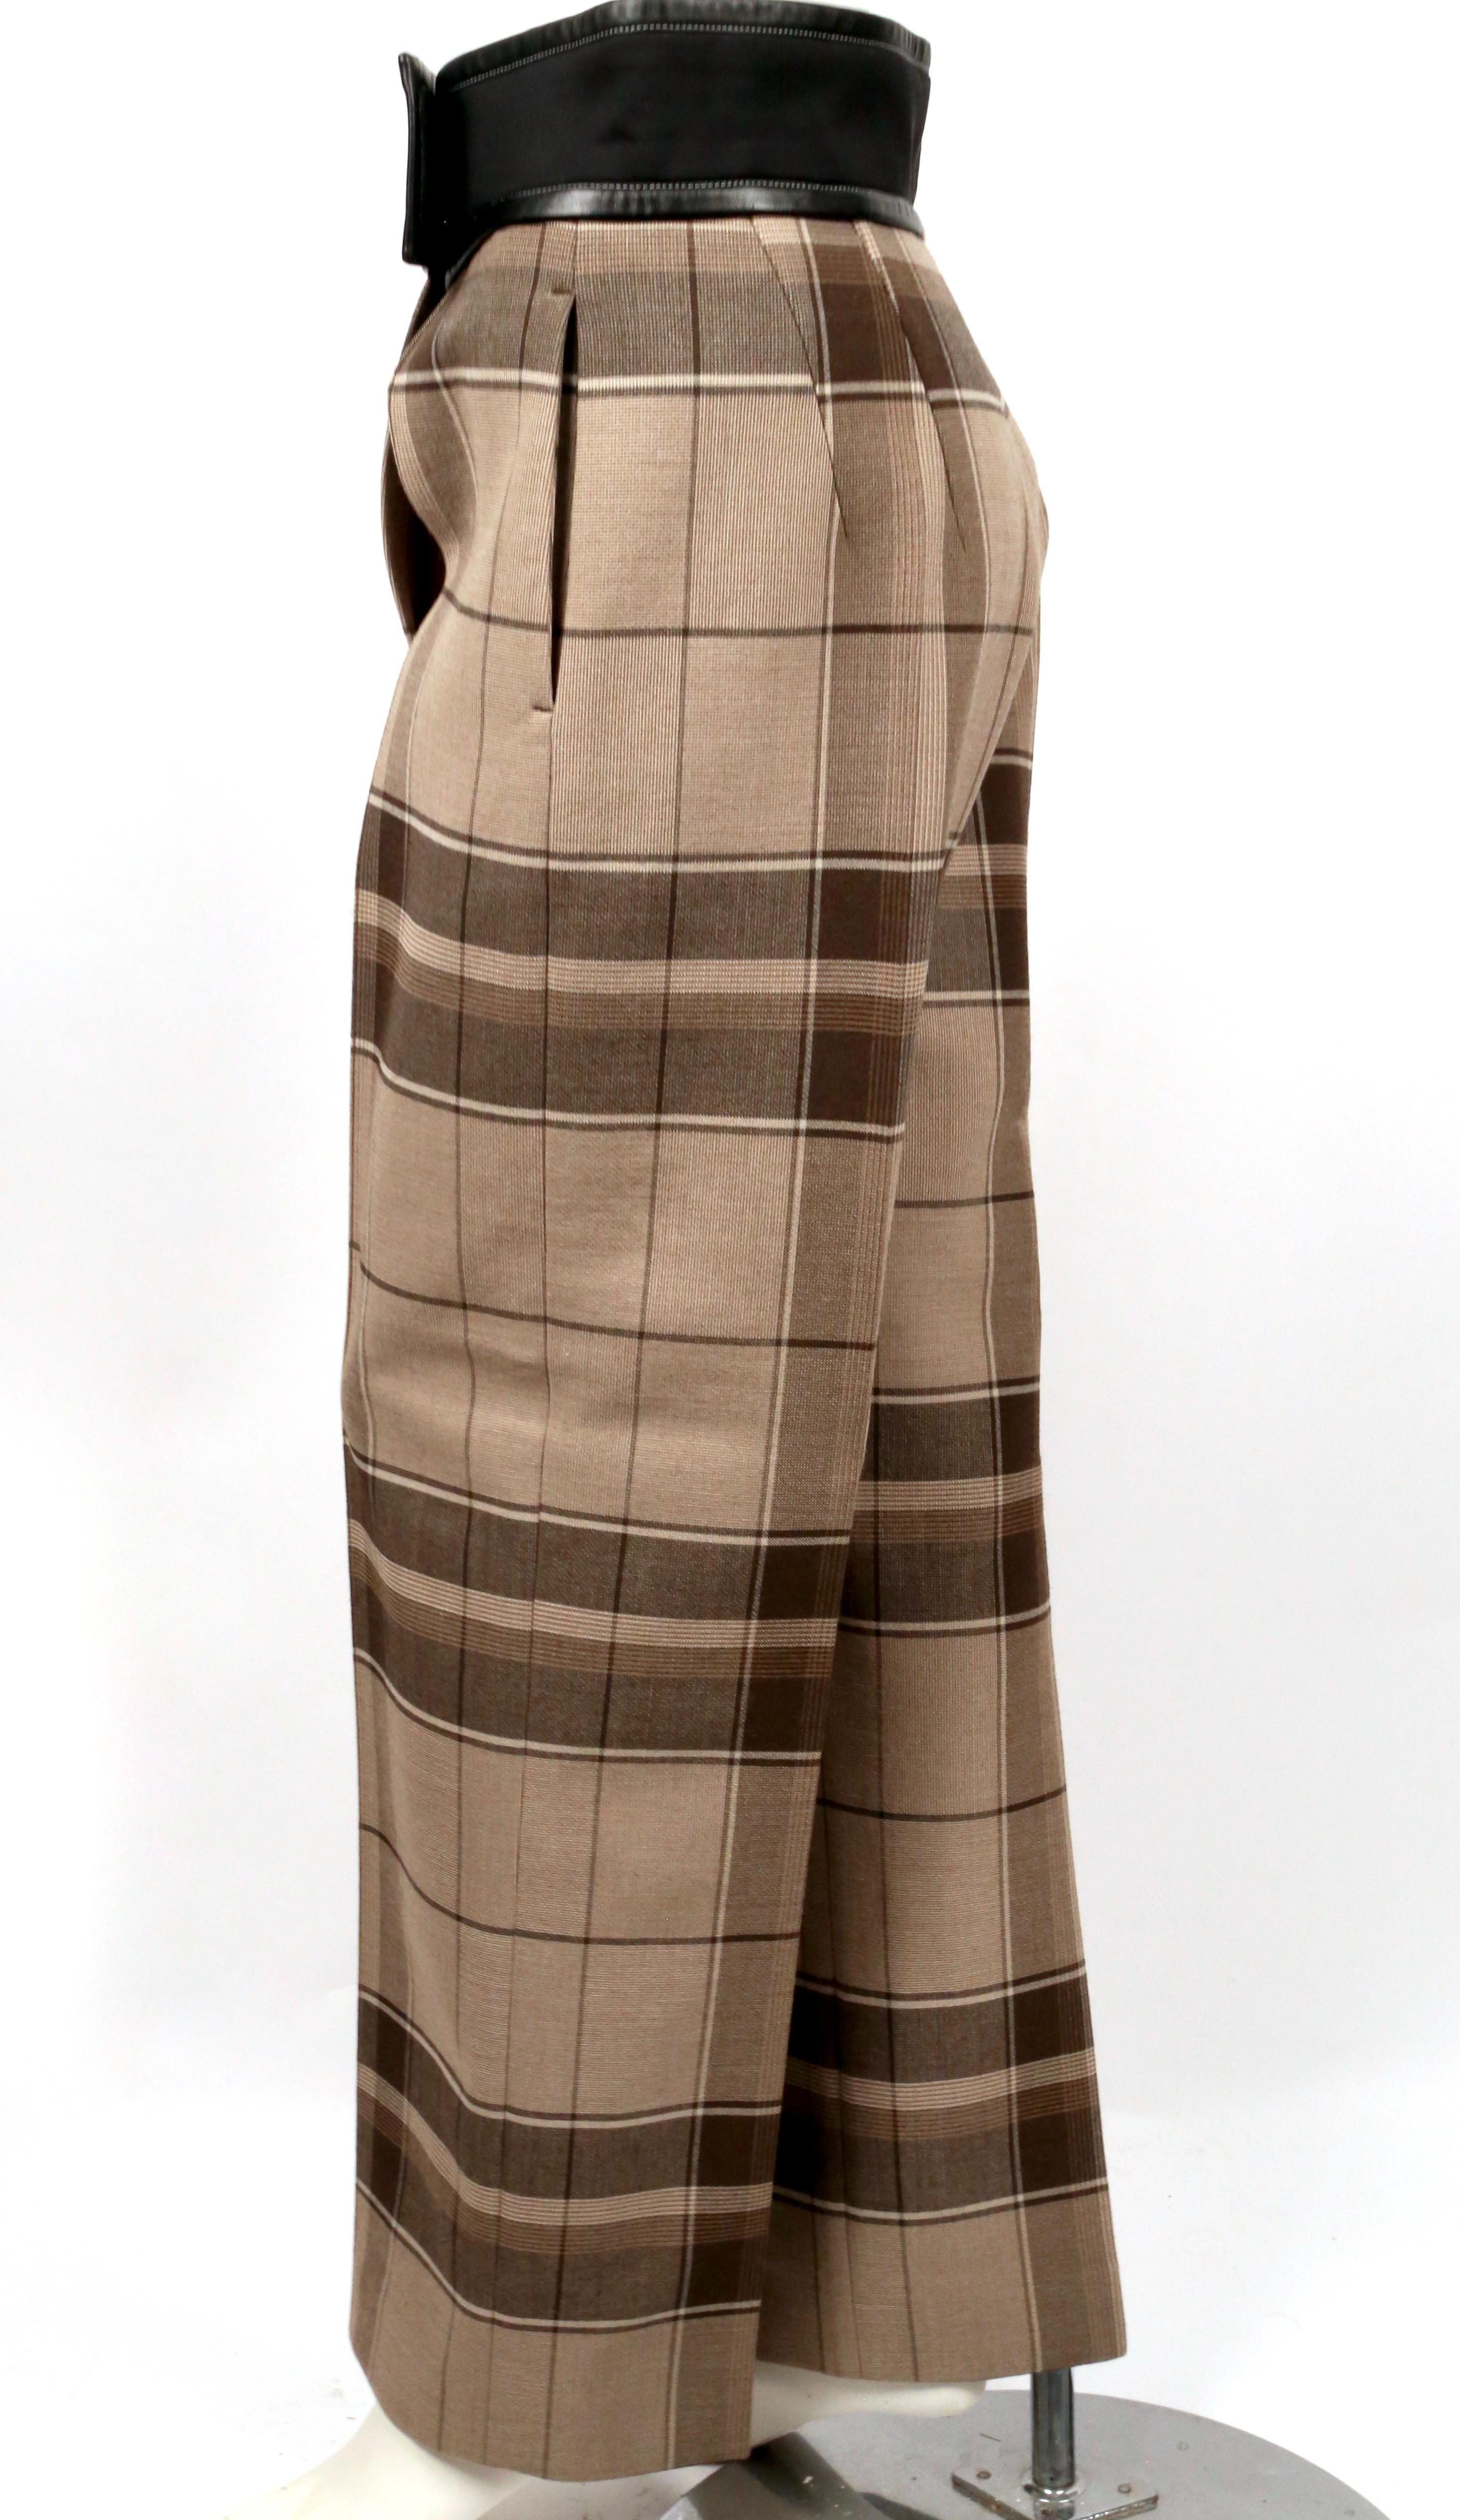 Oversized, plaid wool pants with unique wrap waistband trimmed in leather designed by Phoebe Philo exactly as seen on the spring 2016 runway. French size 36. Approximate measurements: waist 29-31